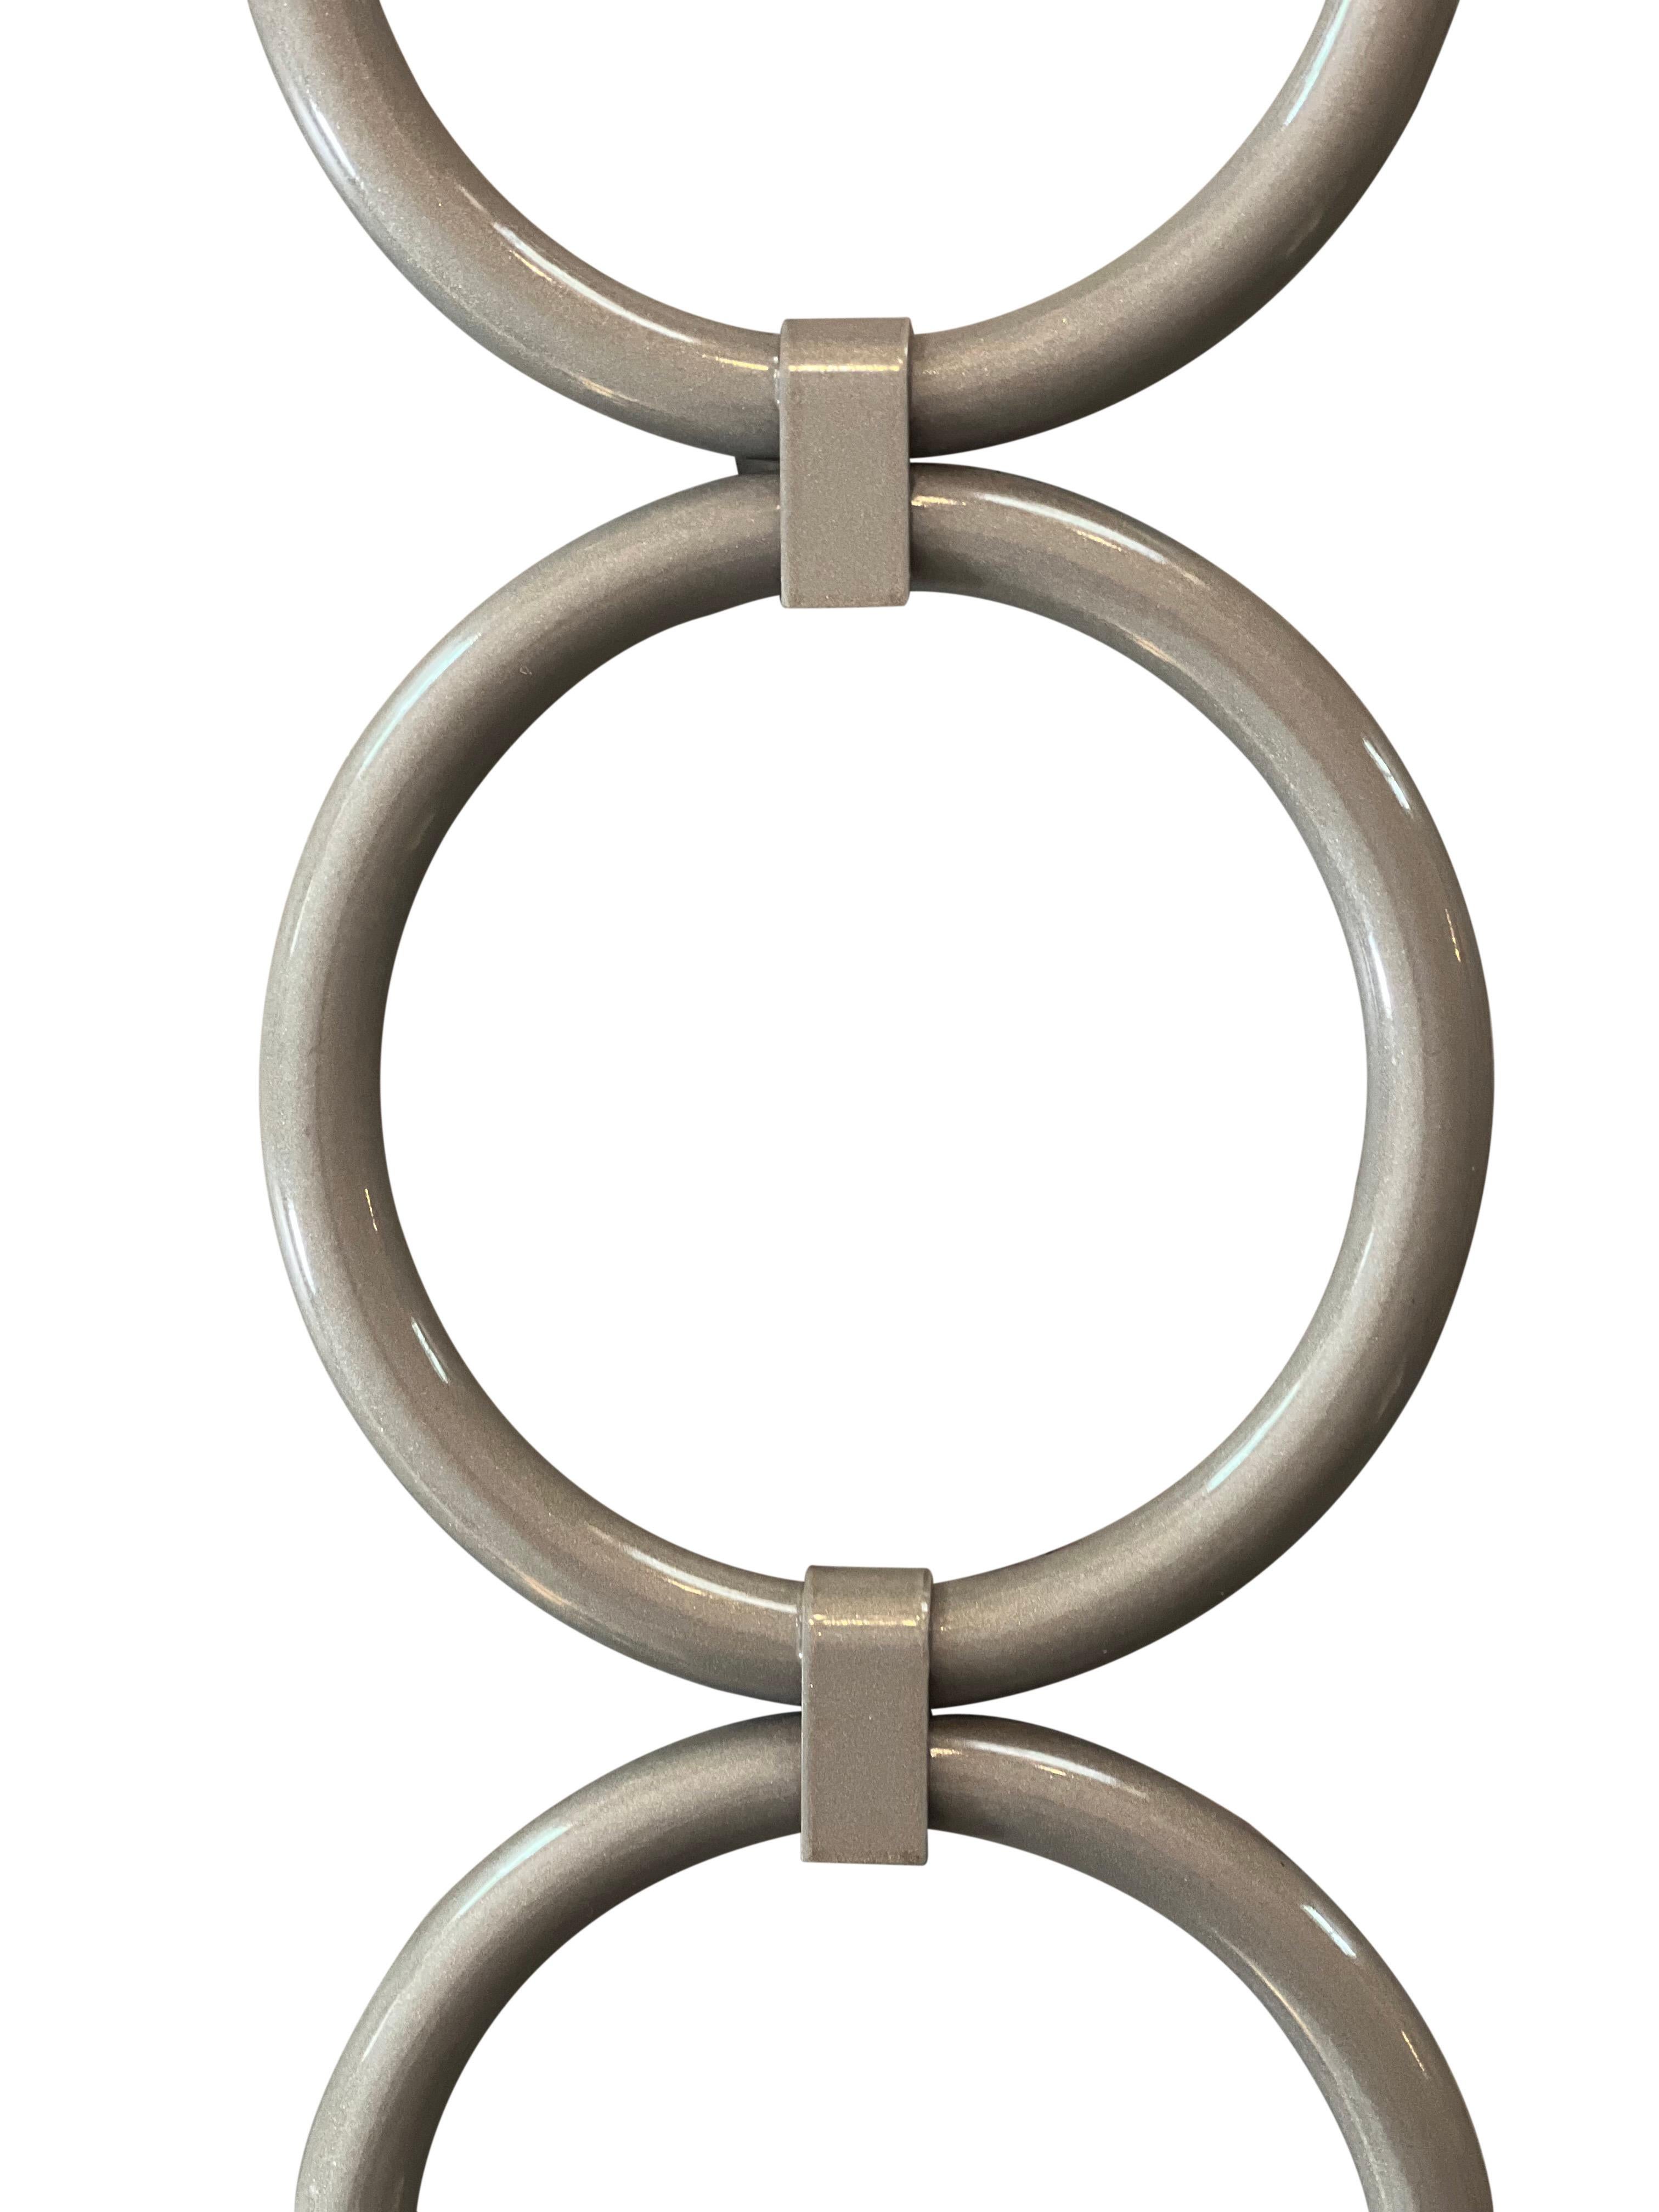 Fabulous Chanel inspired tall sconces with brand new hand-tailored linen blend shades. 

Sconces feature interlocking, symmetrical rings in a neutral taupe with a glossy finish. Shades lay flush against the wall with a semi-circular shape